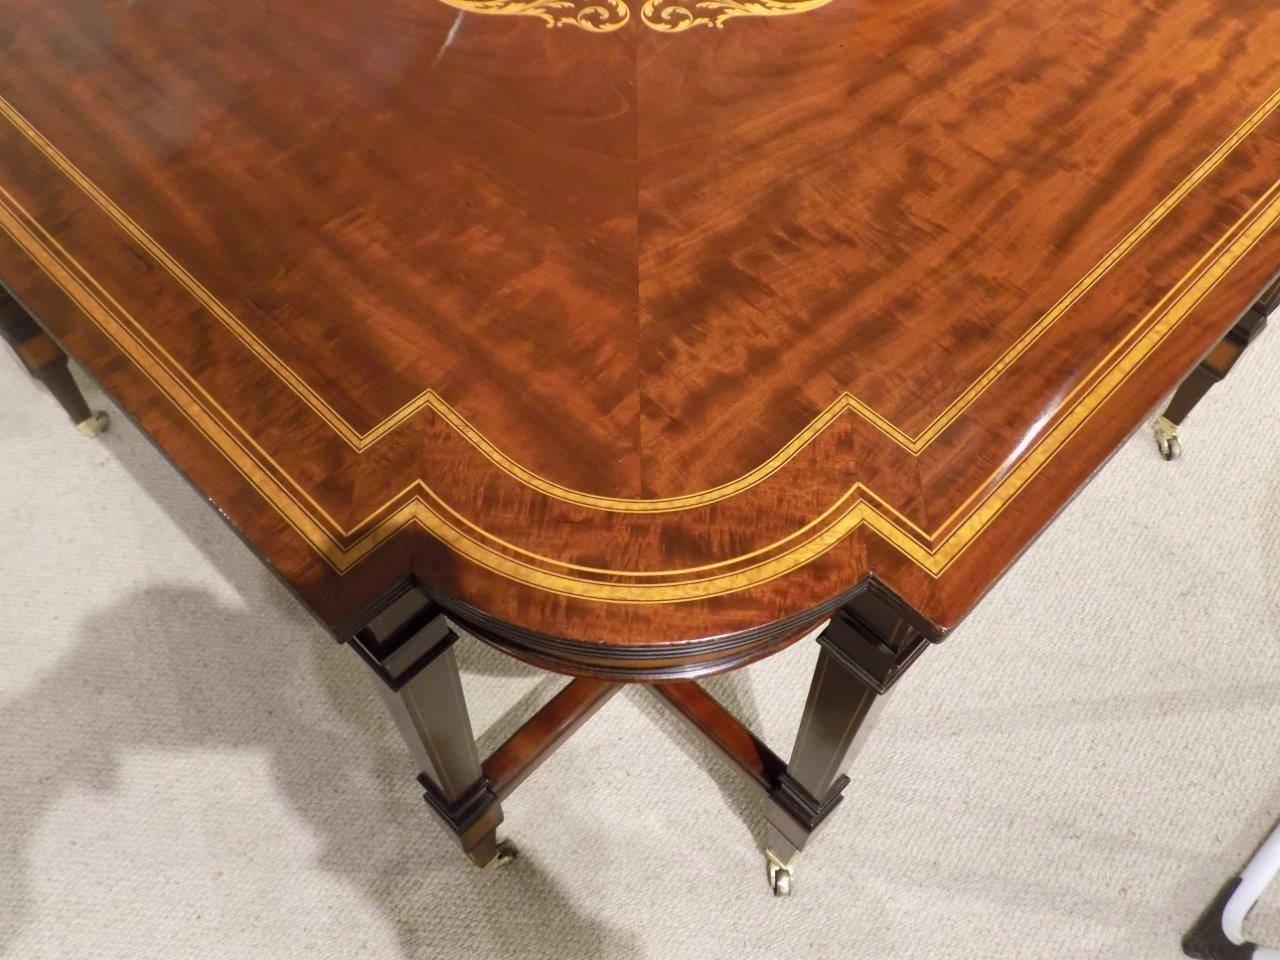 Large and Rare Mahogany Inlaid Edwardian Period Antique Centre Table For Sale 3